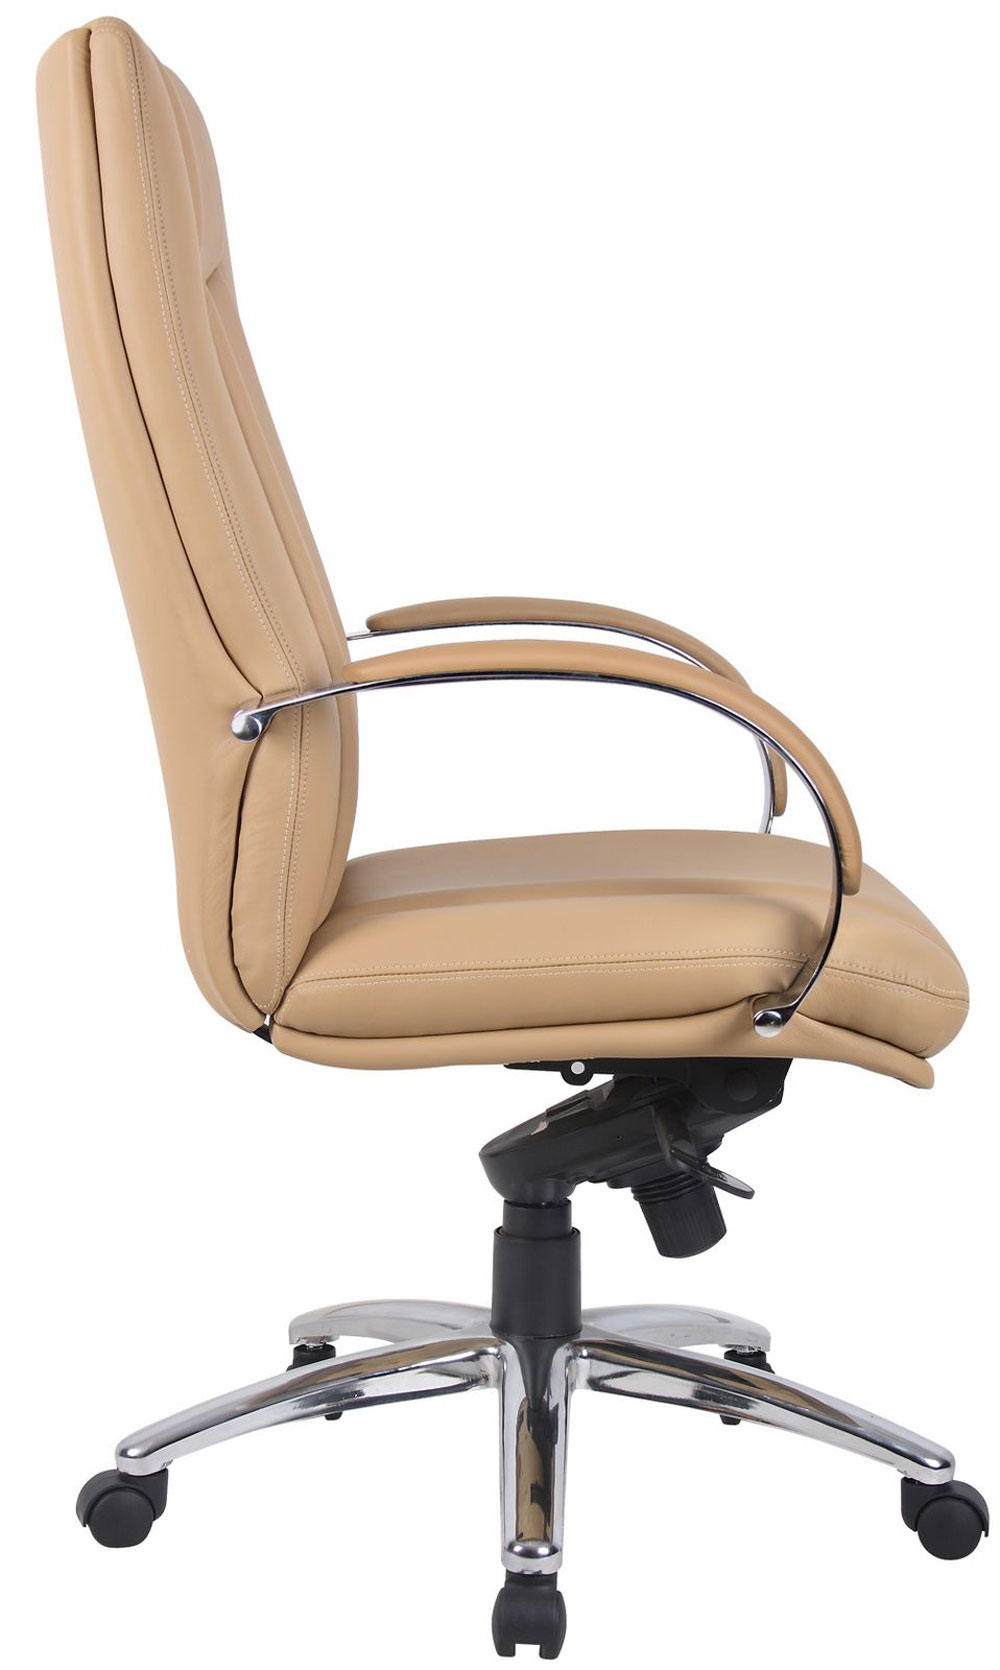 Executive Desk Chairs Leather